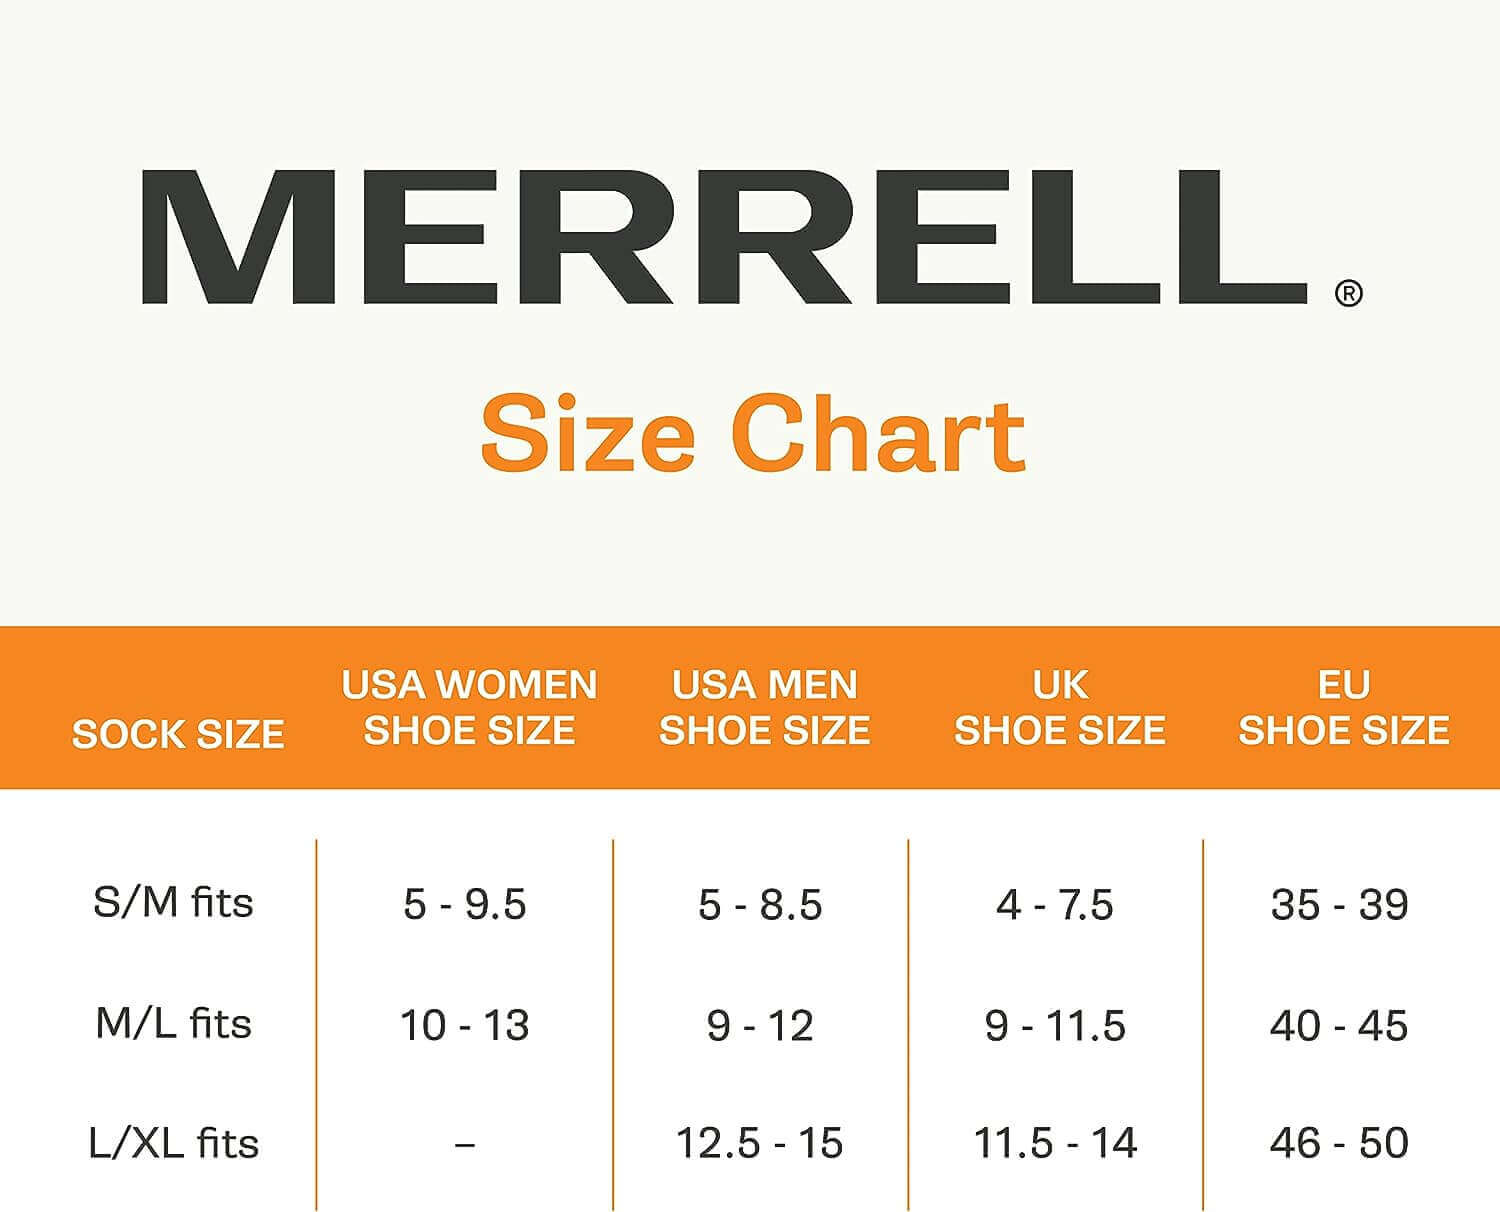 Shop The Latest >Merrell Men's and Women's Moab Hiking Mid Cushion Socks > *Only $19.56*> From The Top Brand > *Merrelll* > Shop Now and Get Free Shipping On Orders Over $45.00 >*Shop Earth Foot*